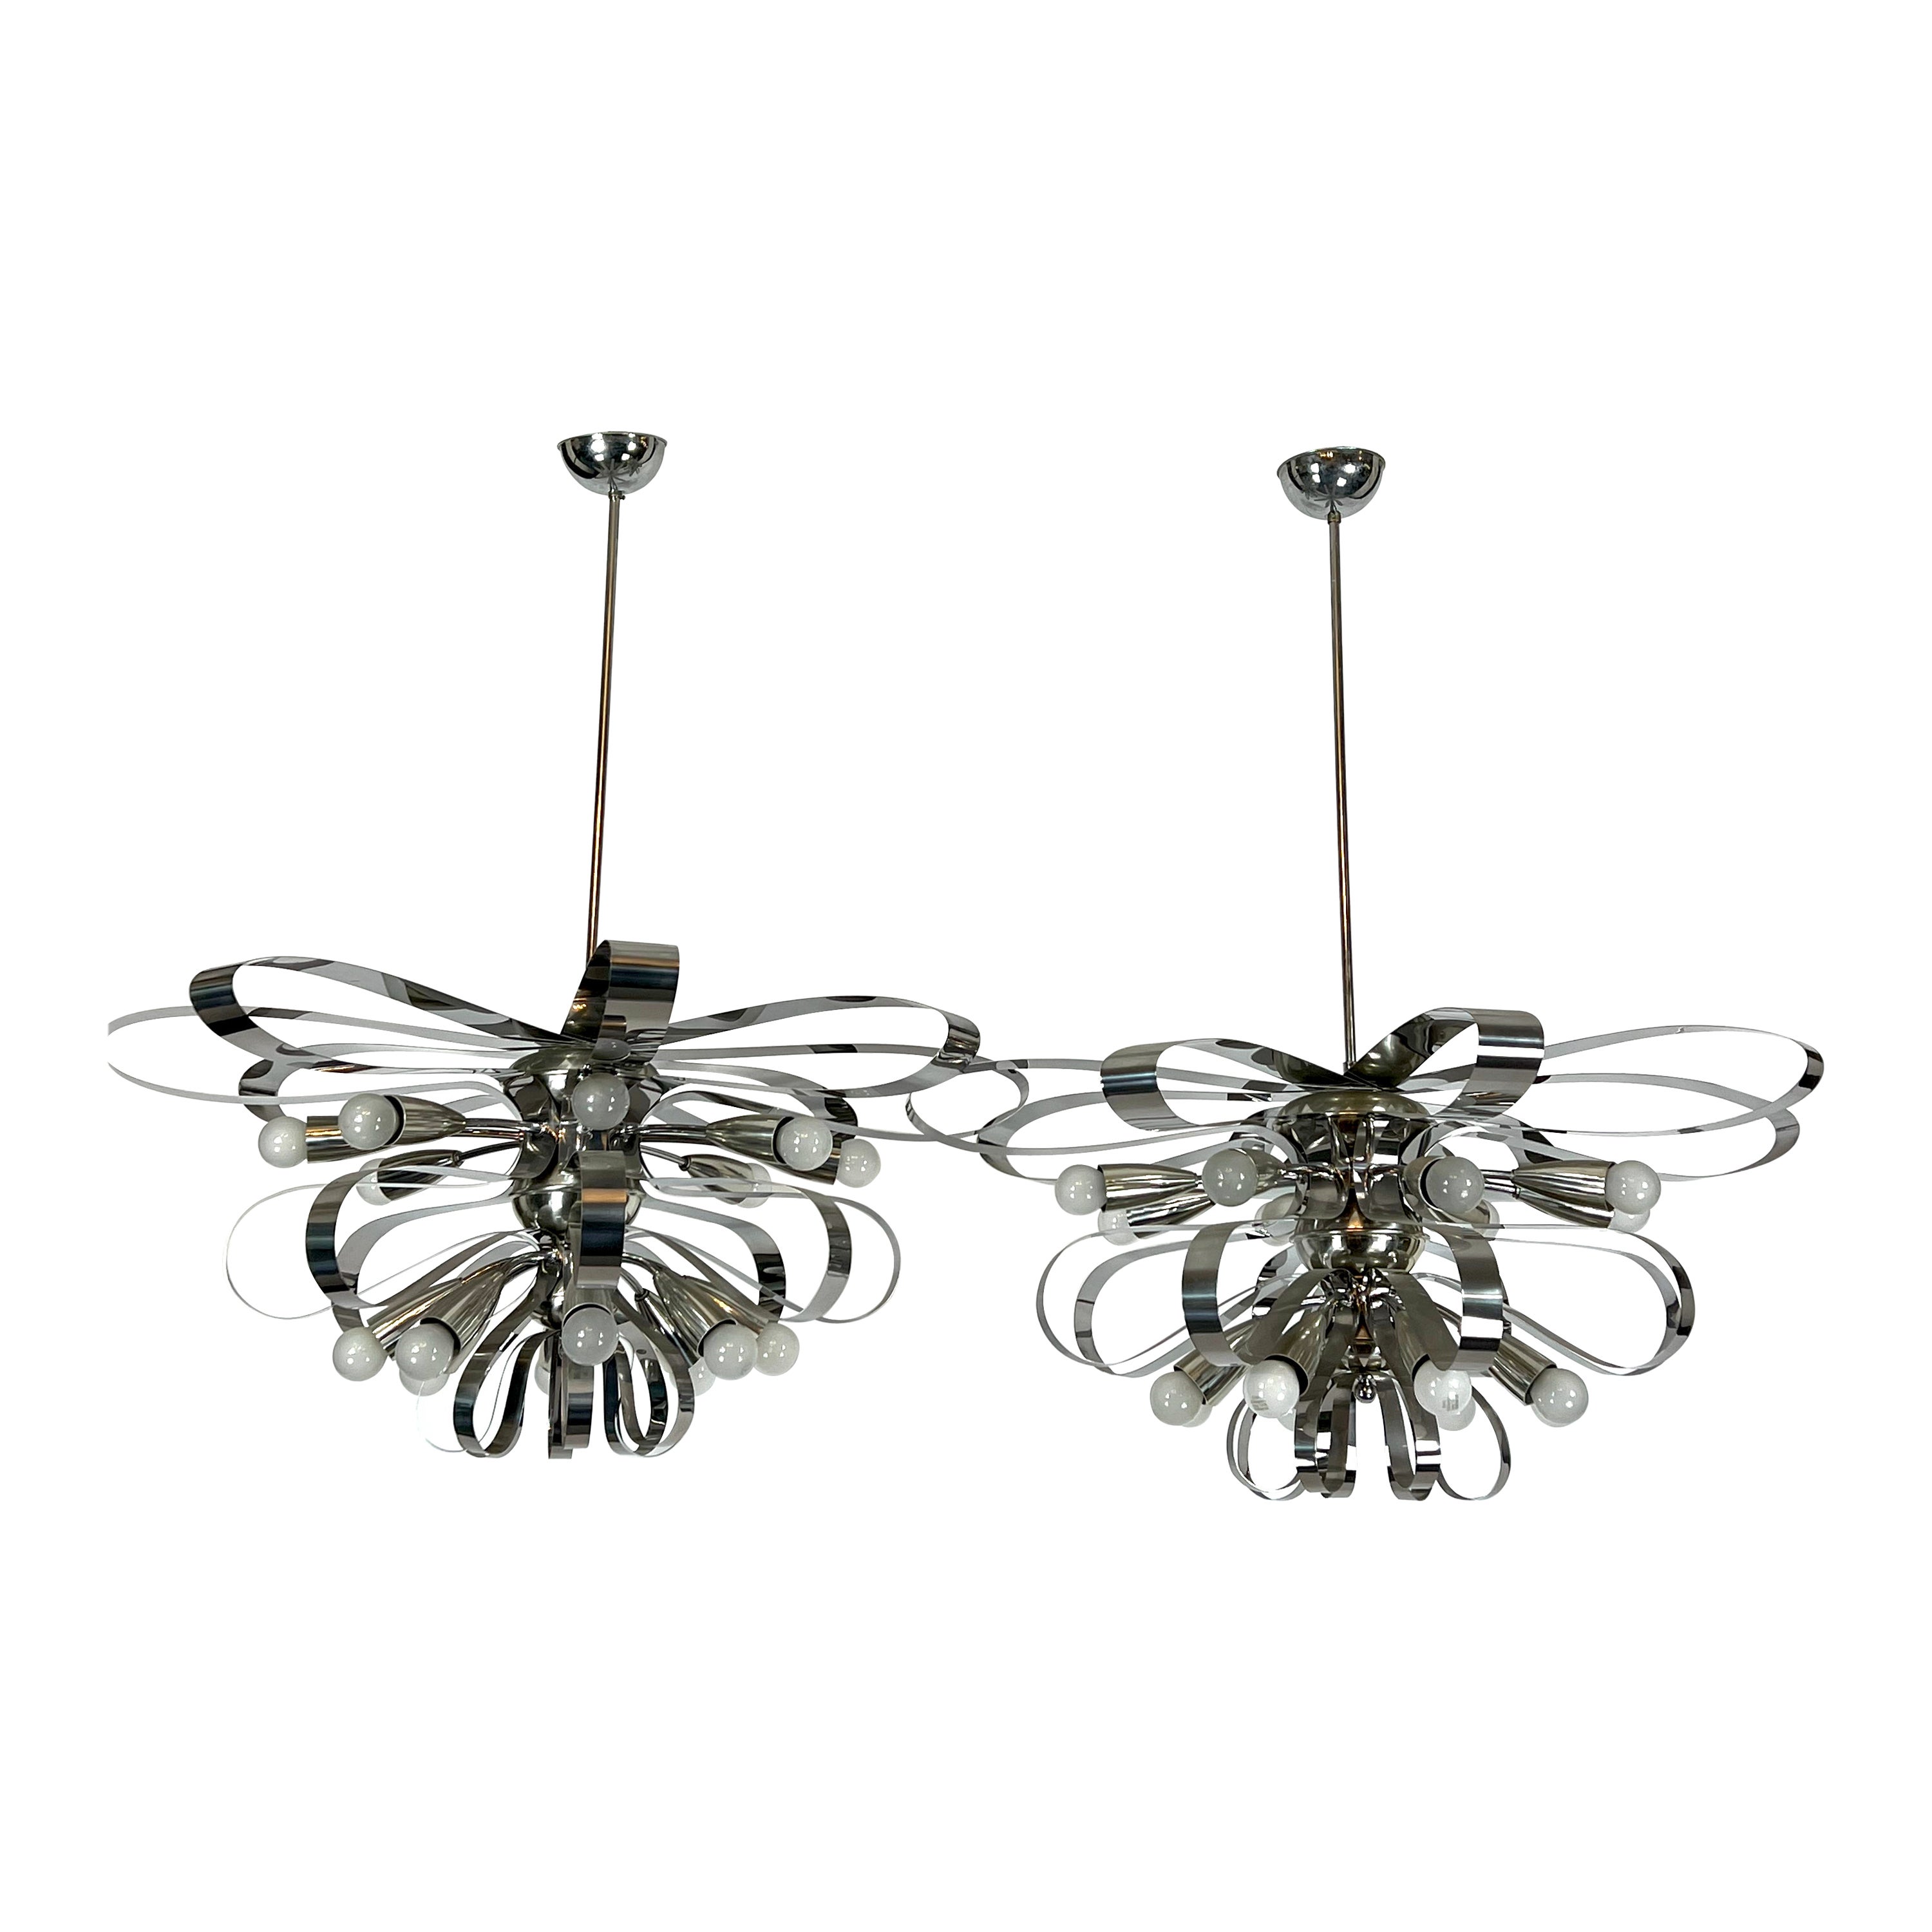 Mid-Century Pair of Large Italian Chrome Chandeliers from 70s